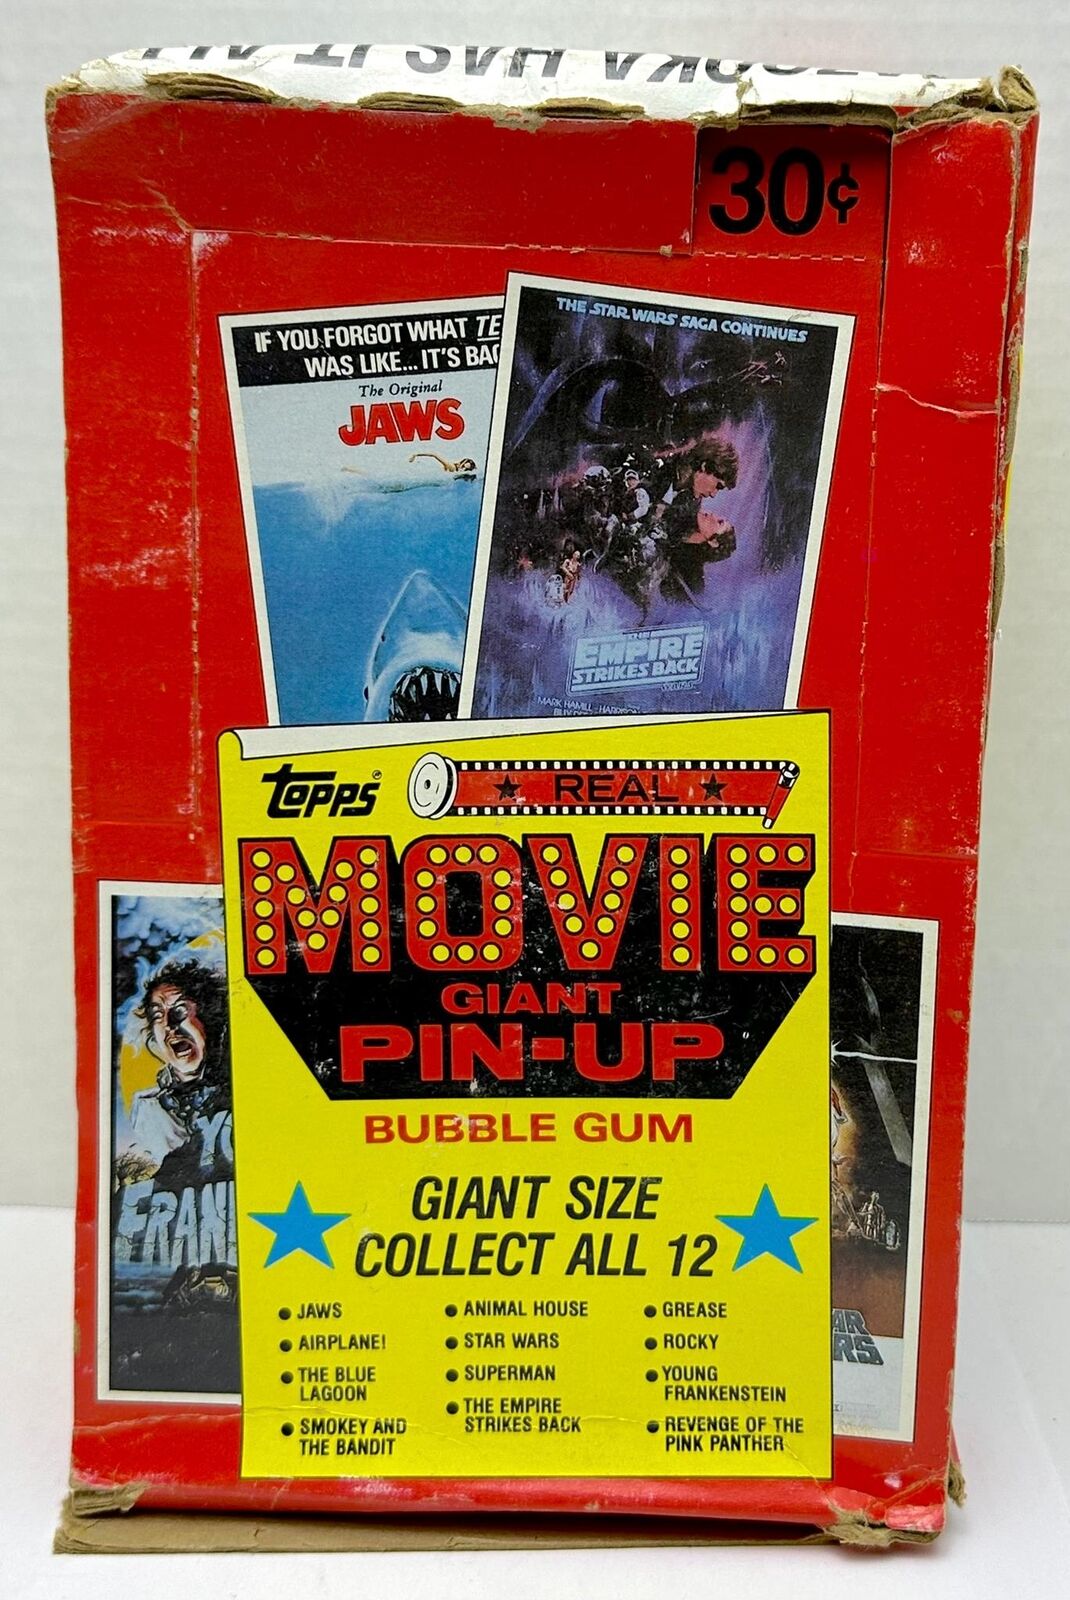 1981 Topps Movie Giant Pin-Up Posters Full Box 36 Sealed Packs Jaws Star Wars